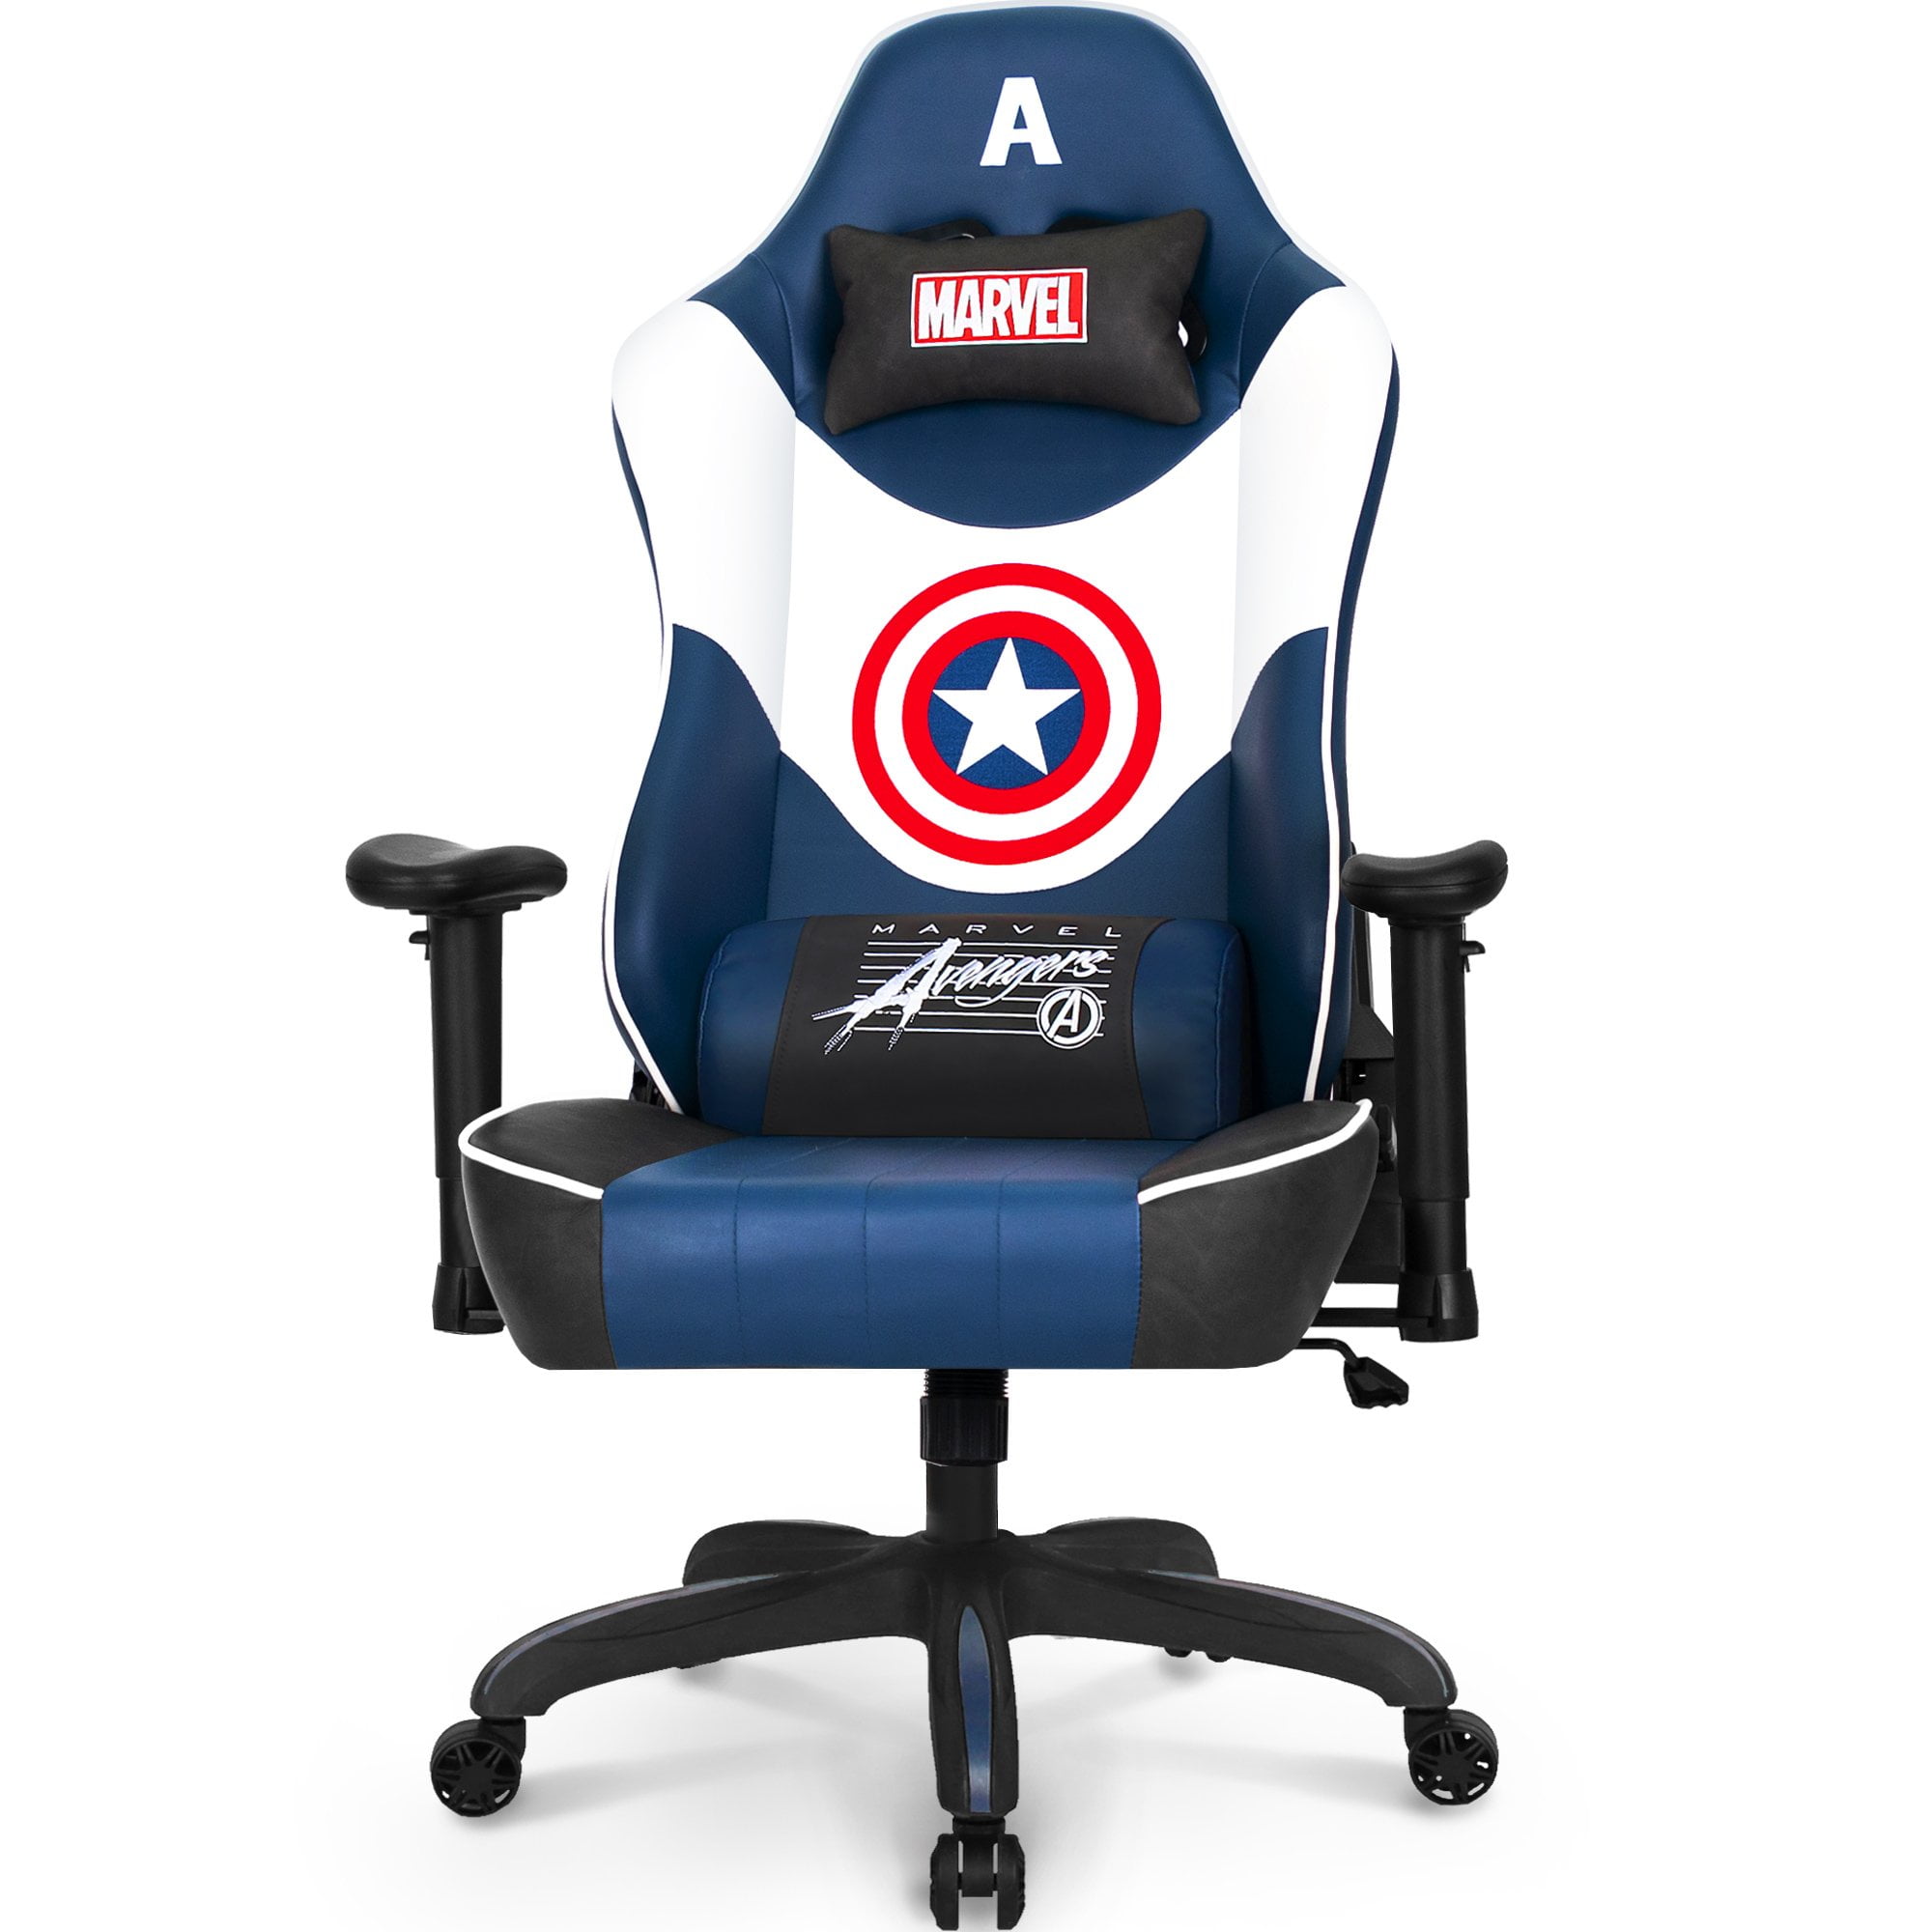 Video Game Stool Gaming Chair Stool Footstool Simple Chair Footrest Meeting Chair Swivel Height Adjustable Black Panter NEO CHAIR Licensed Marvel Multi-Use Stool w/Wheel 1 Year Warranty